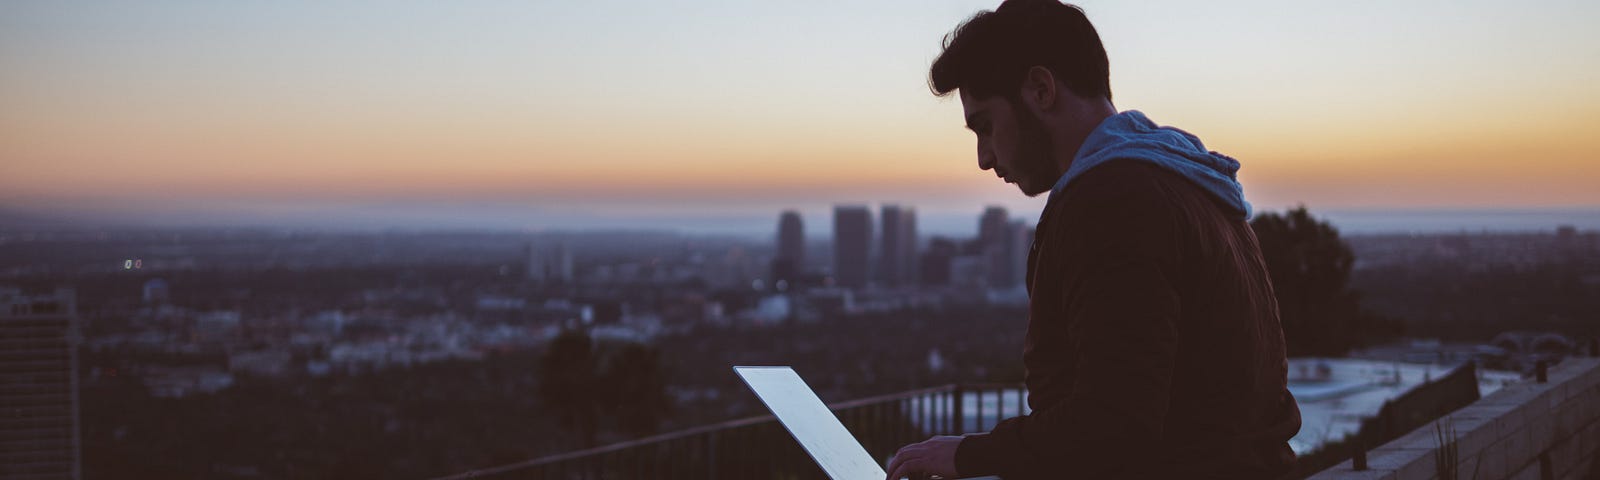 Man working from the top floor of a building during sunset. Credits: Unsplash